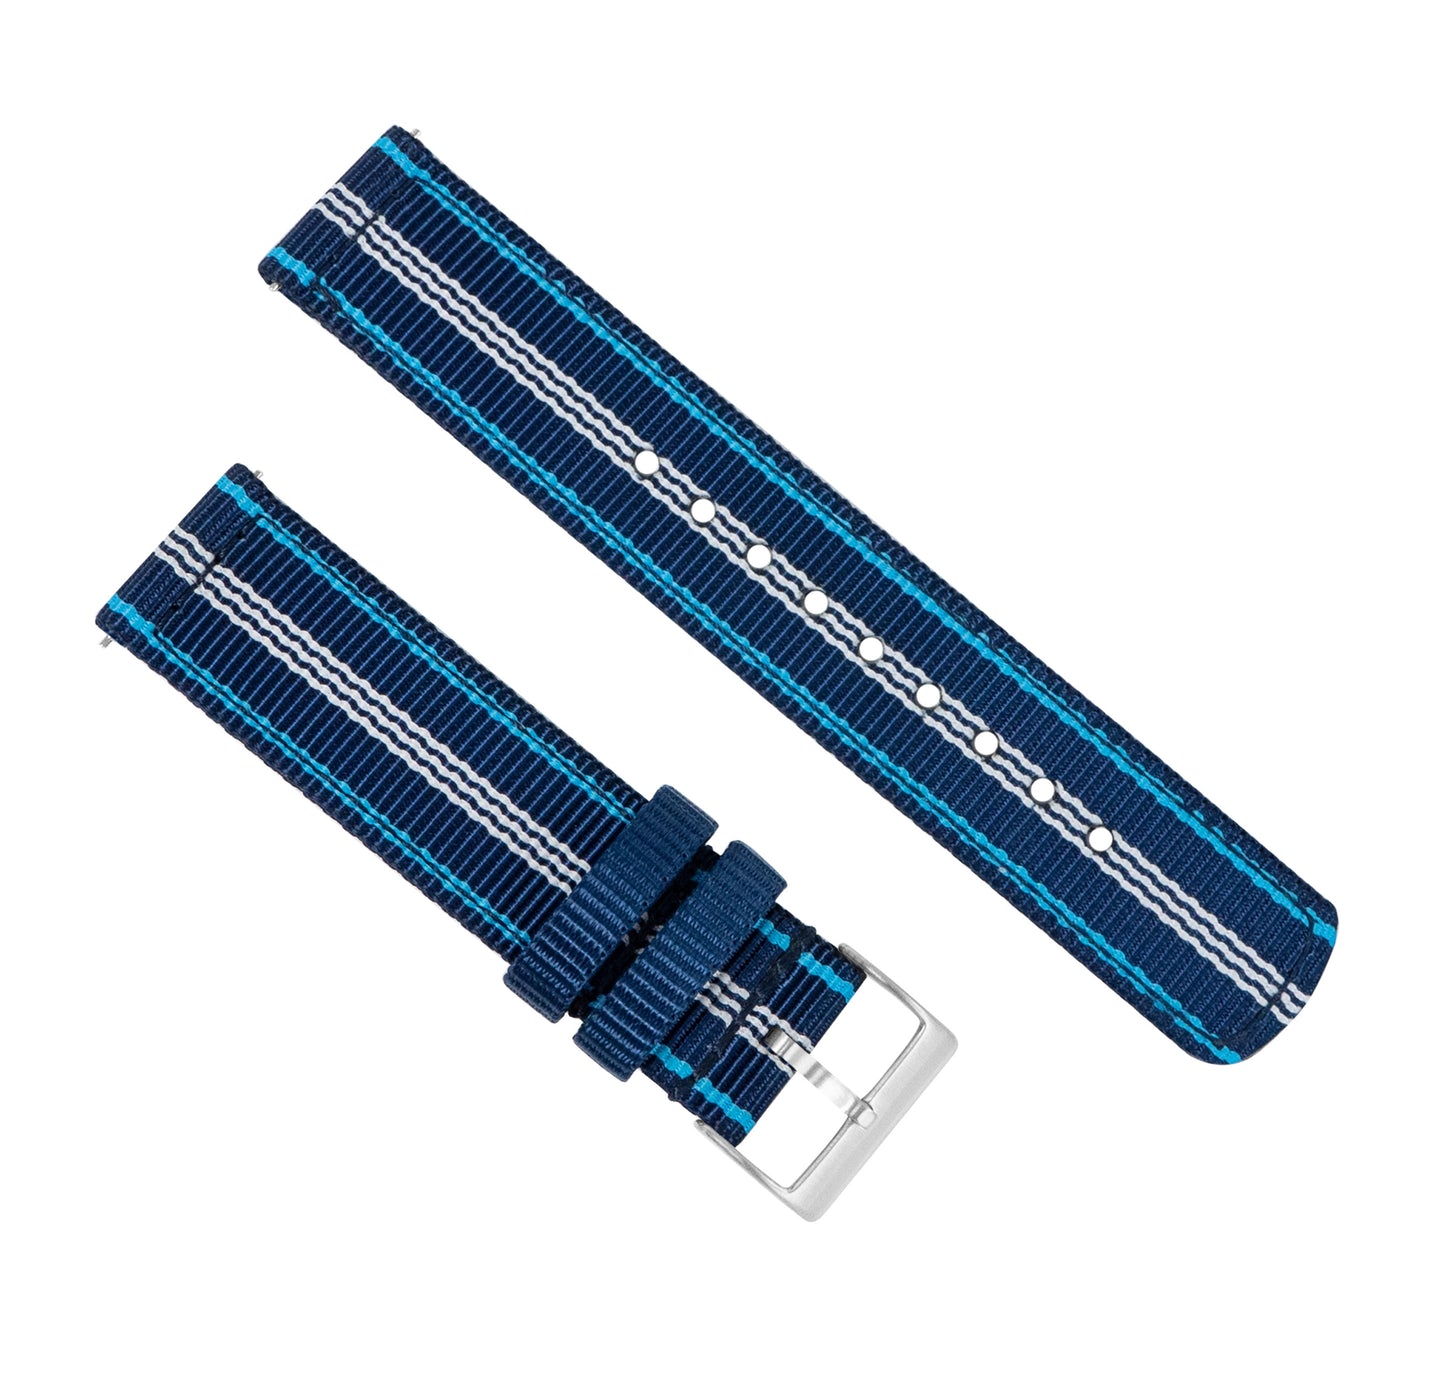 Fossil Sport | Two-Piece NATO Style | Navy & Aqua Blue - Barton Watch Bands